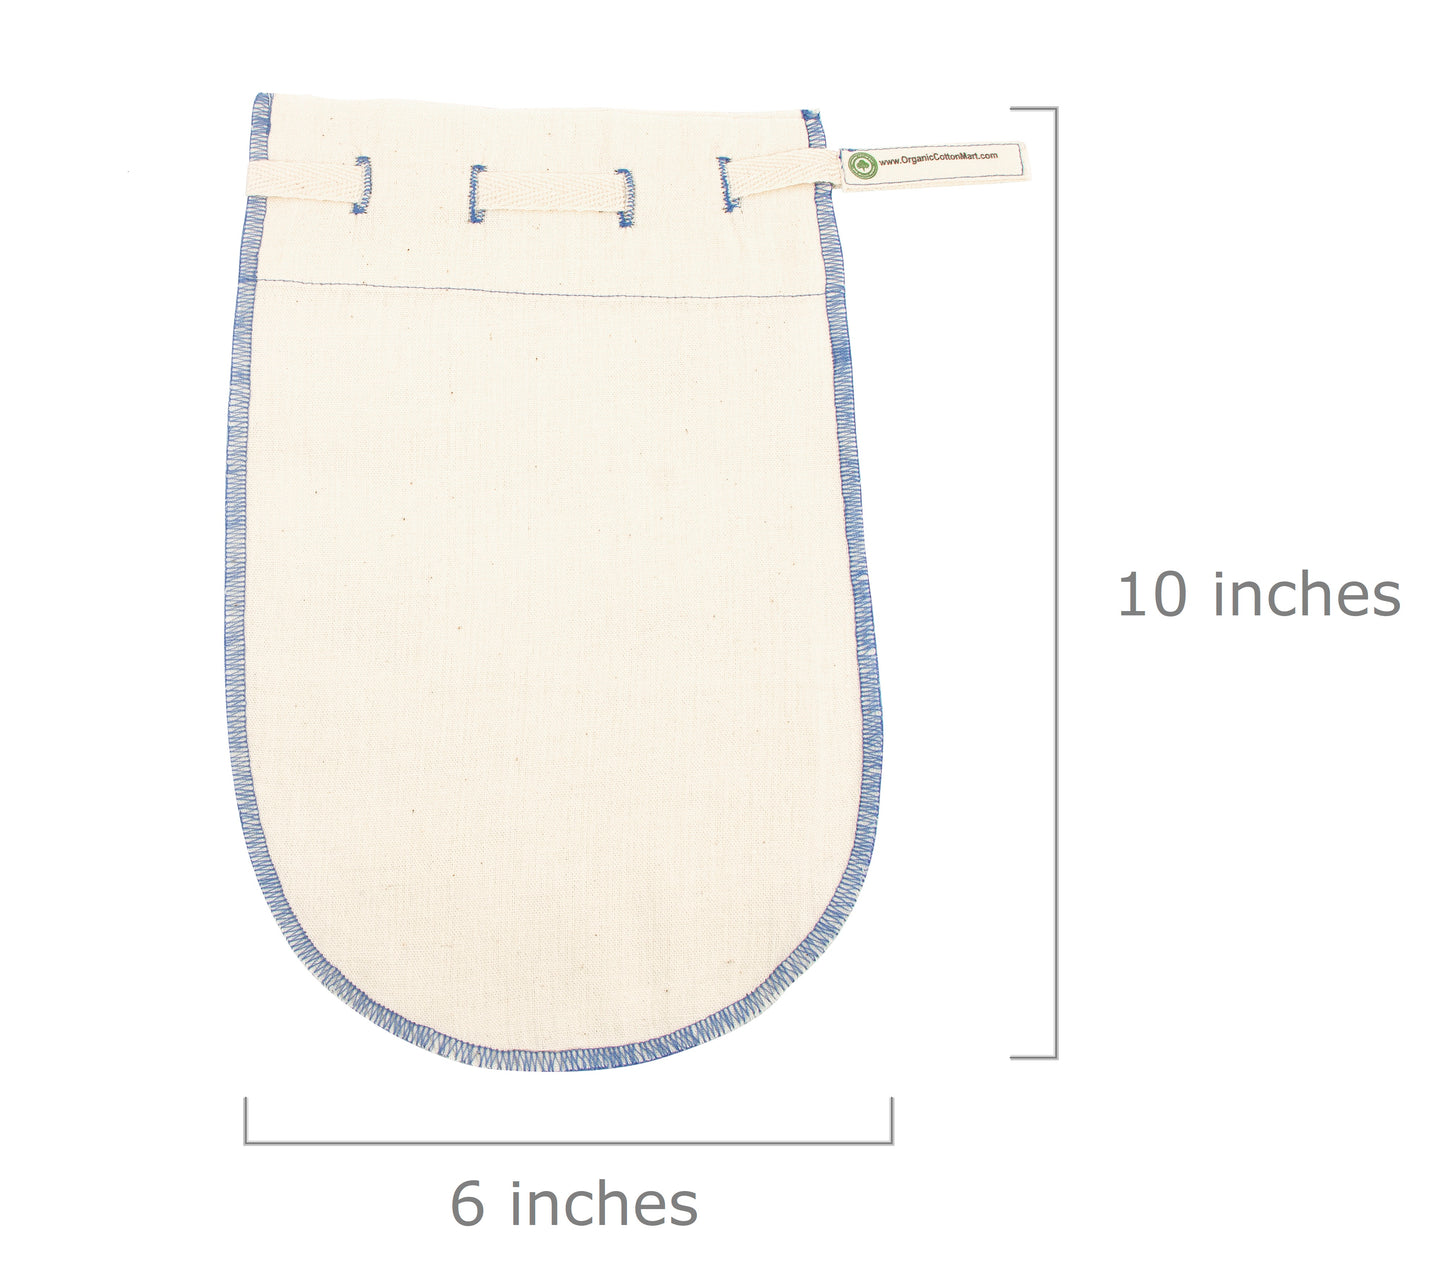 Organic Cotton Cheesecloth Bags - Nut Milk Straining Bags - Filtration Bags